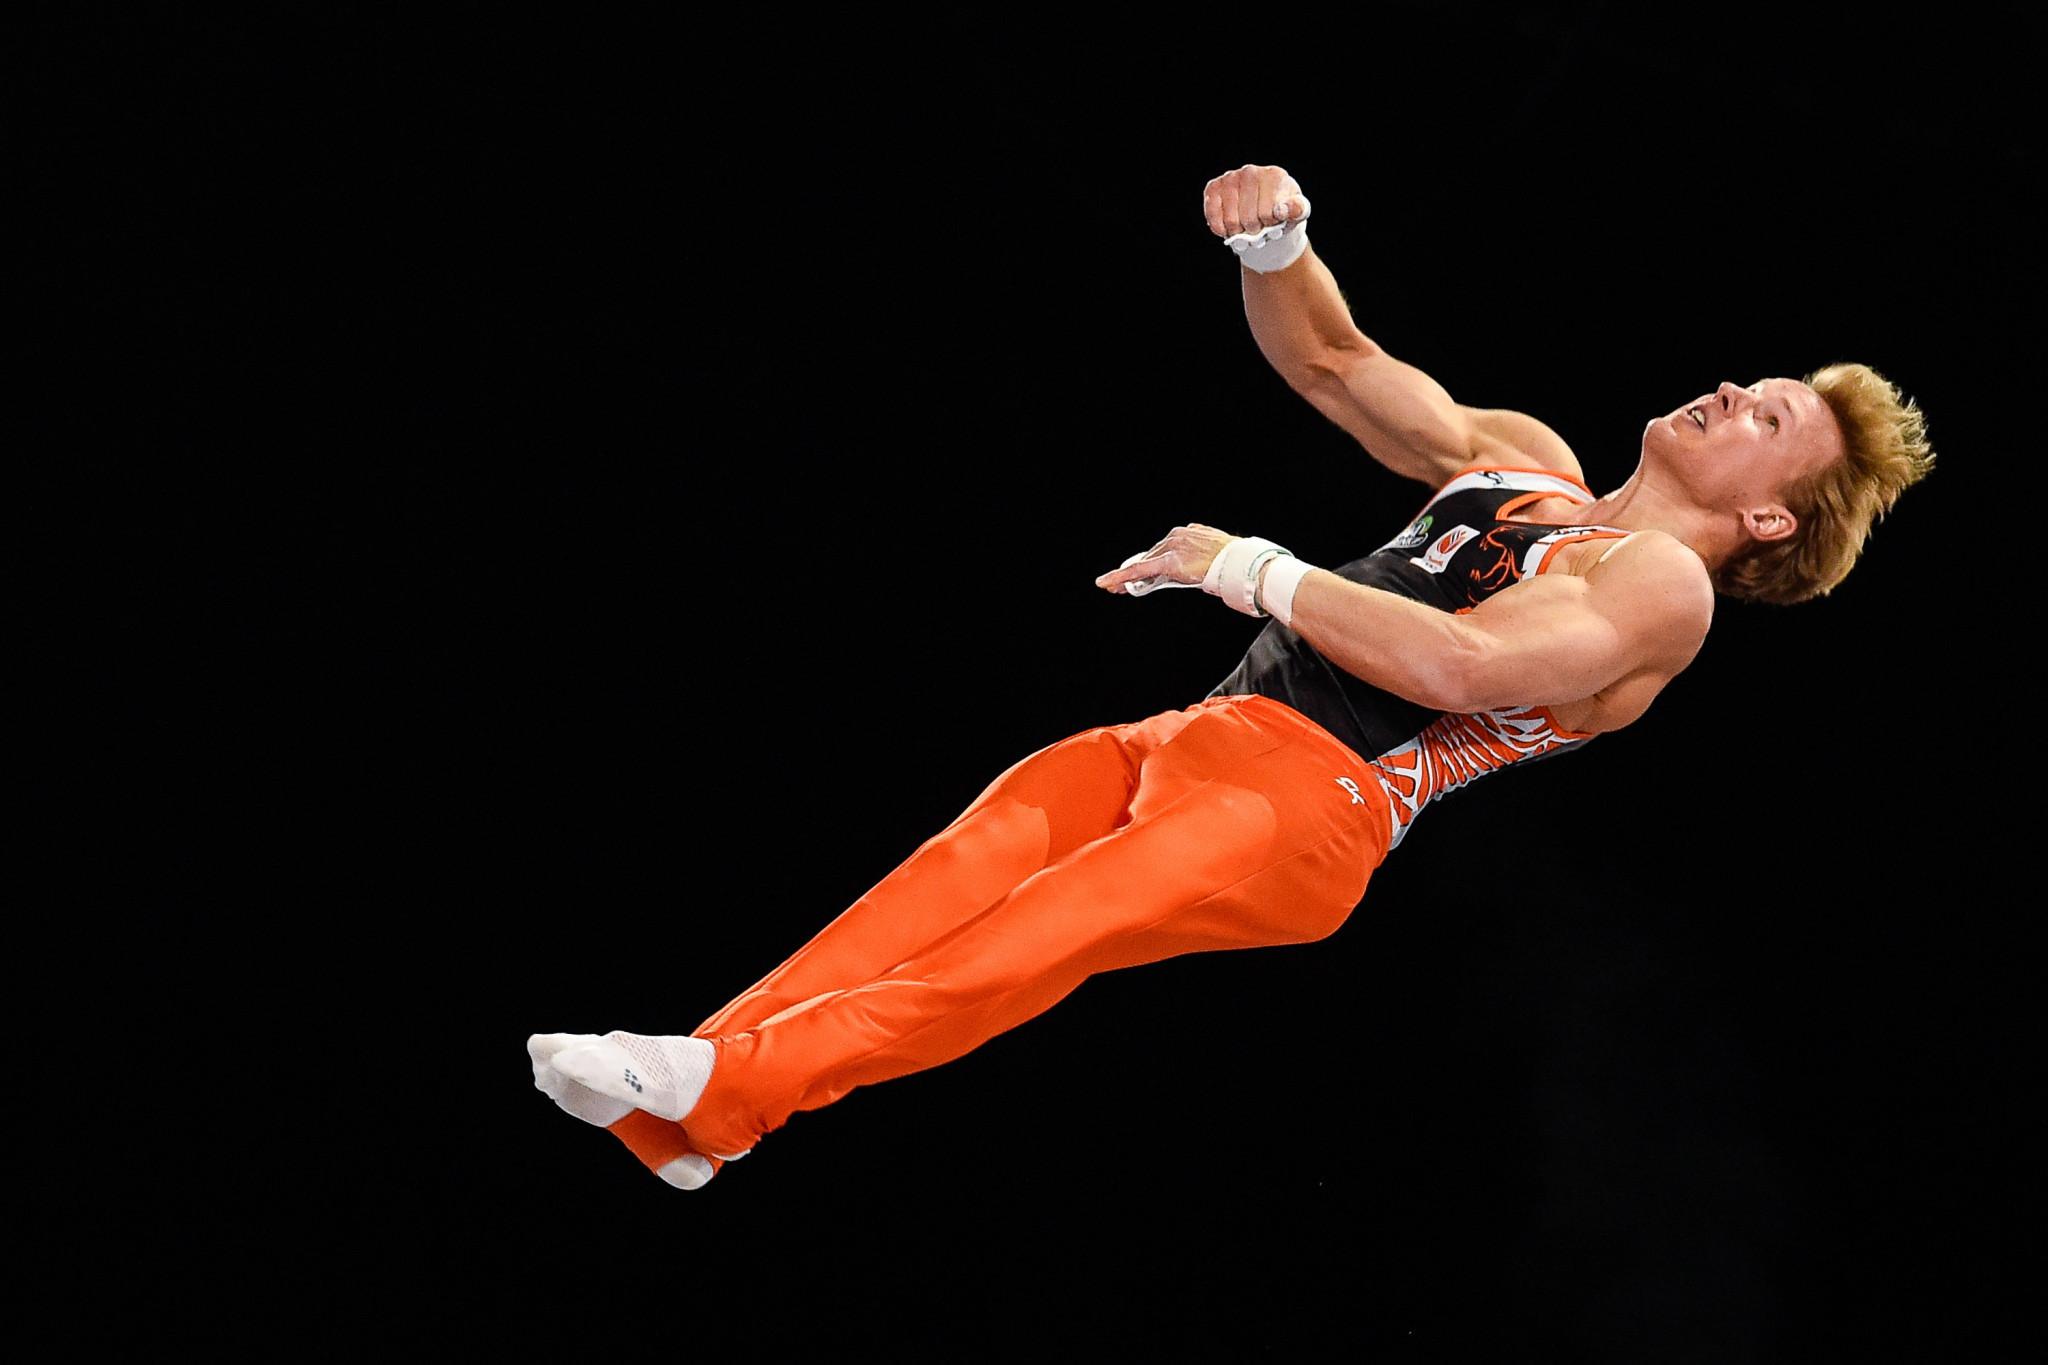 Zonderland and Srbić to renew rivalry at FIG World Challenge Cup in Slovenia